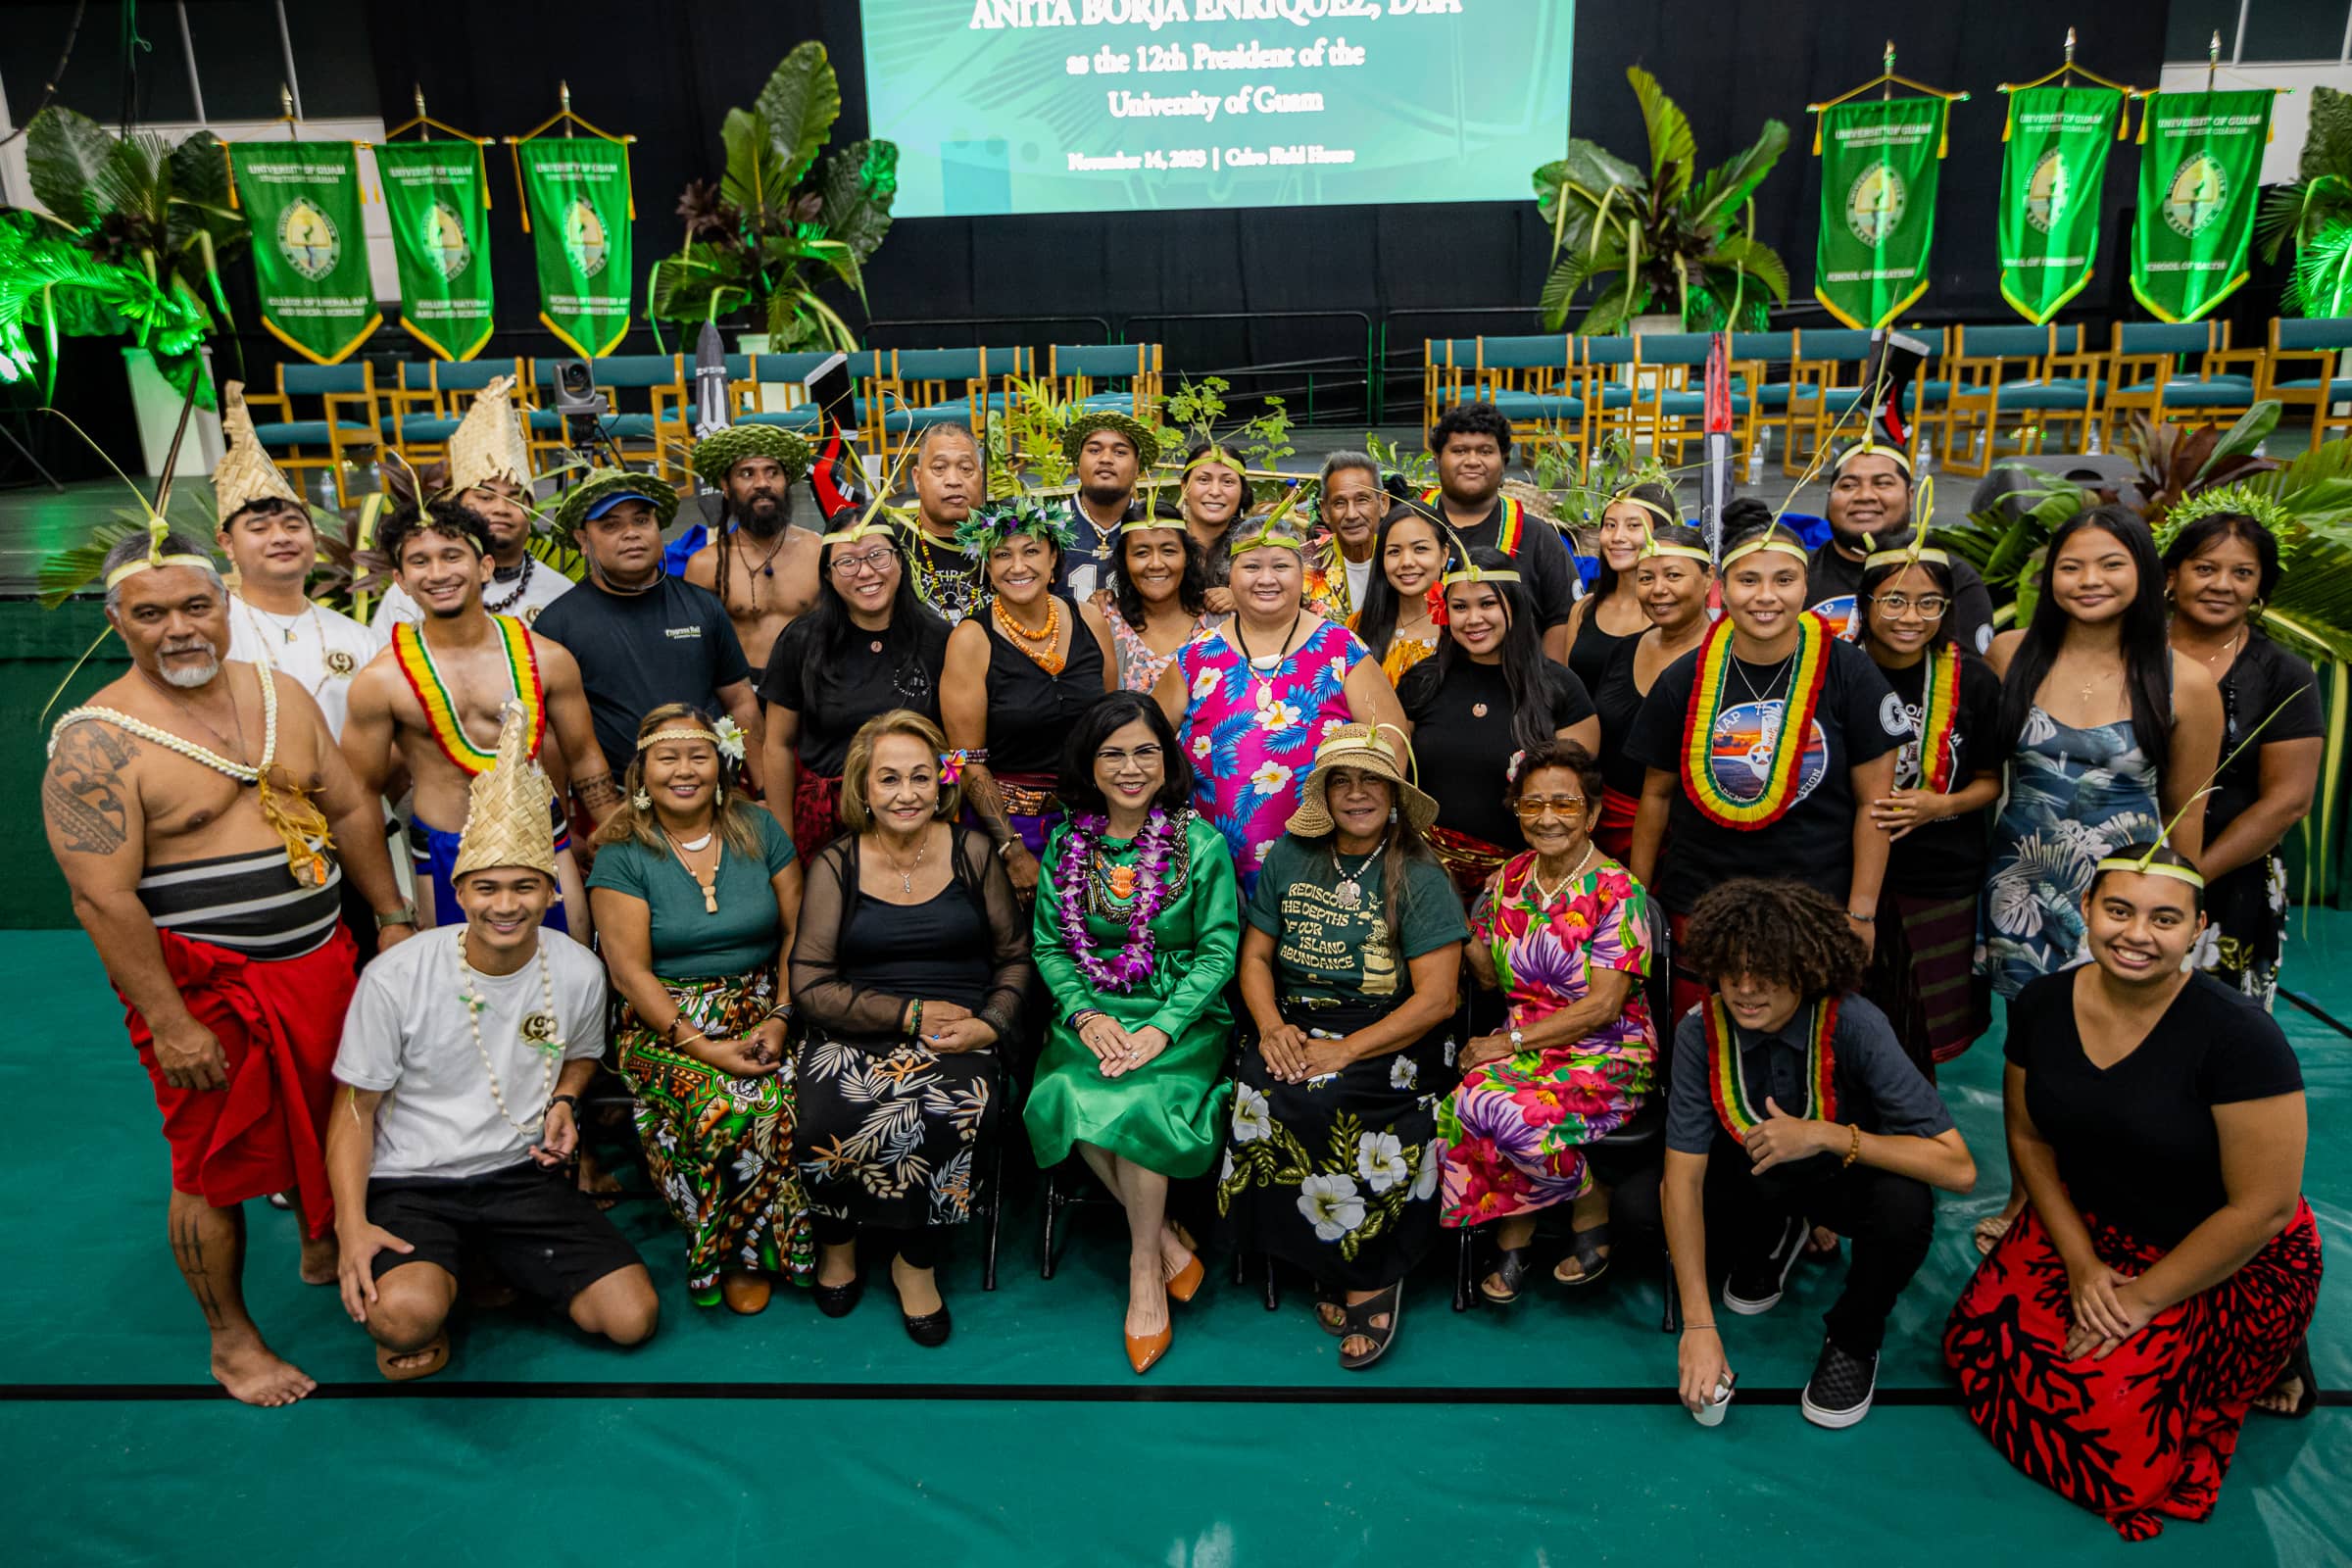 Members of the University of Guam community gather for a photo with Dr. Anita Borja Enriquez, 12th President of the University of Guam, after her investiture on Tuesday, Nov. 14, at the Calvo Field House. 